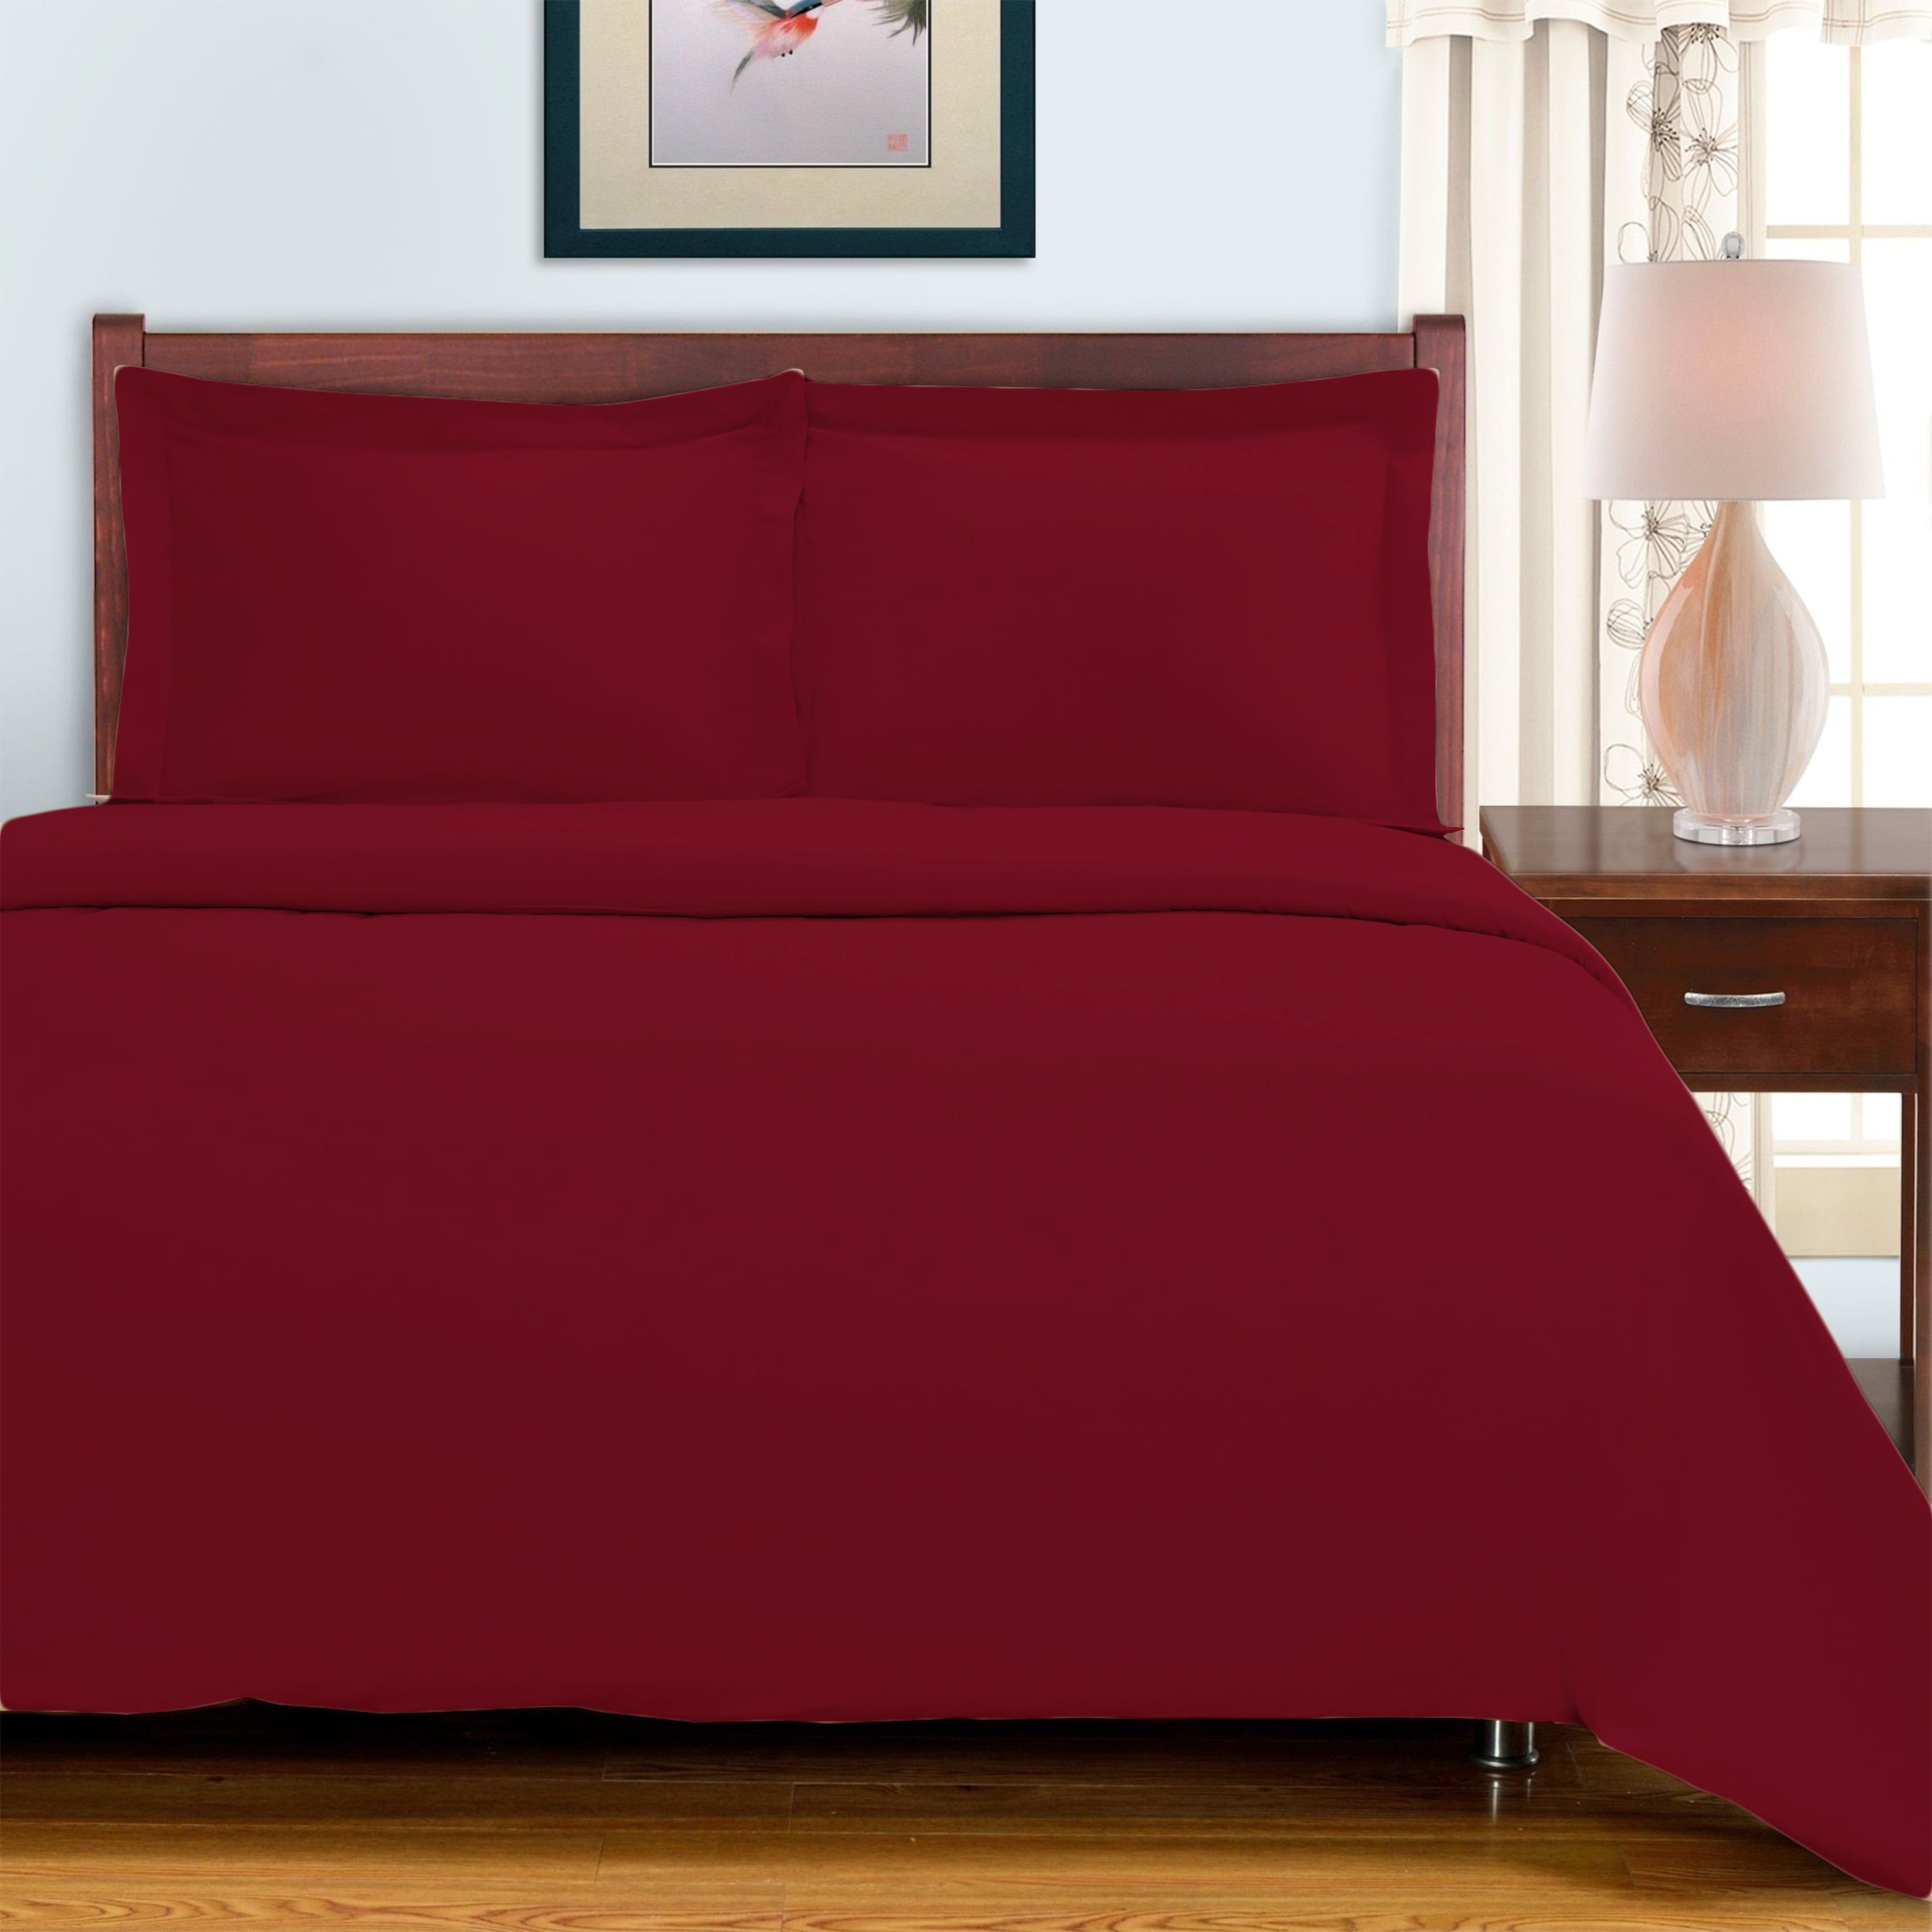 Details about   California King Size All Bedding Item 1000 TC Best Egyptian Cotton Solid Colors 